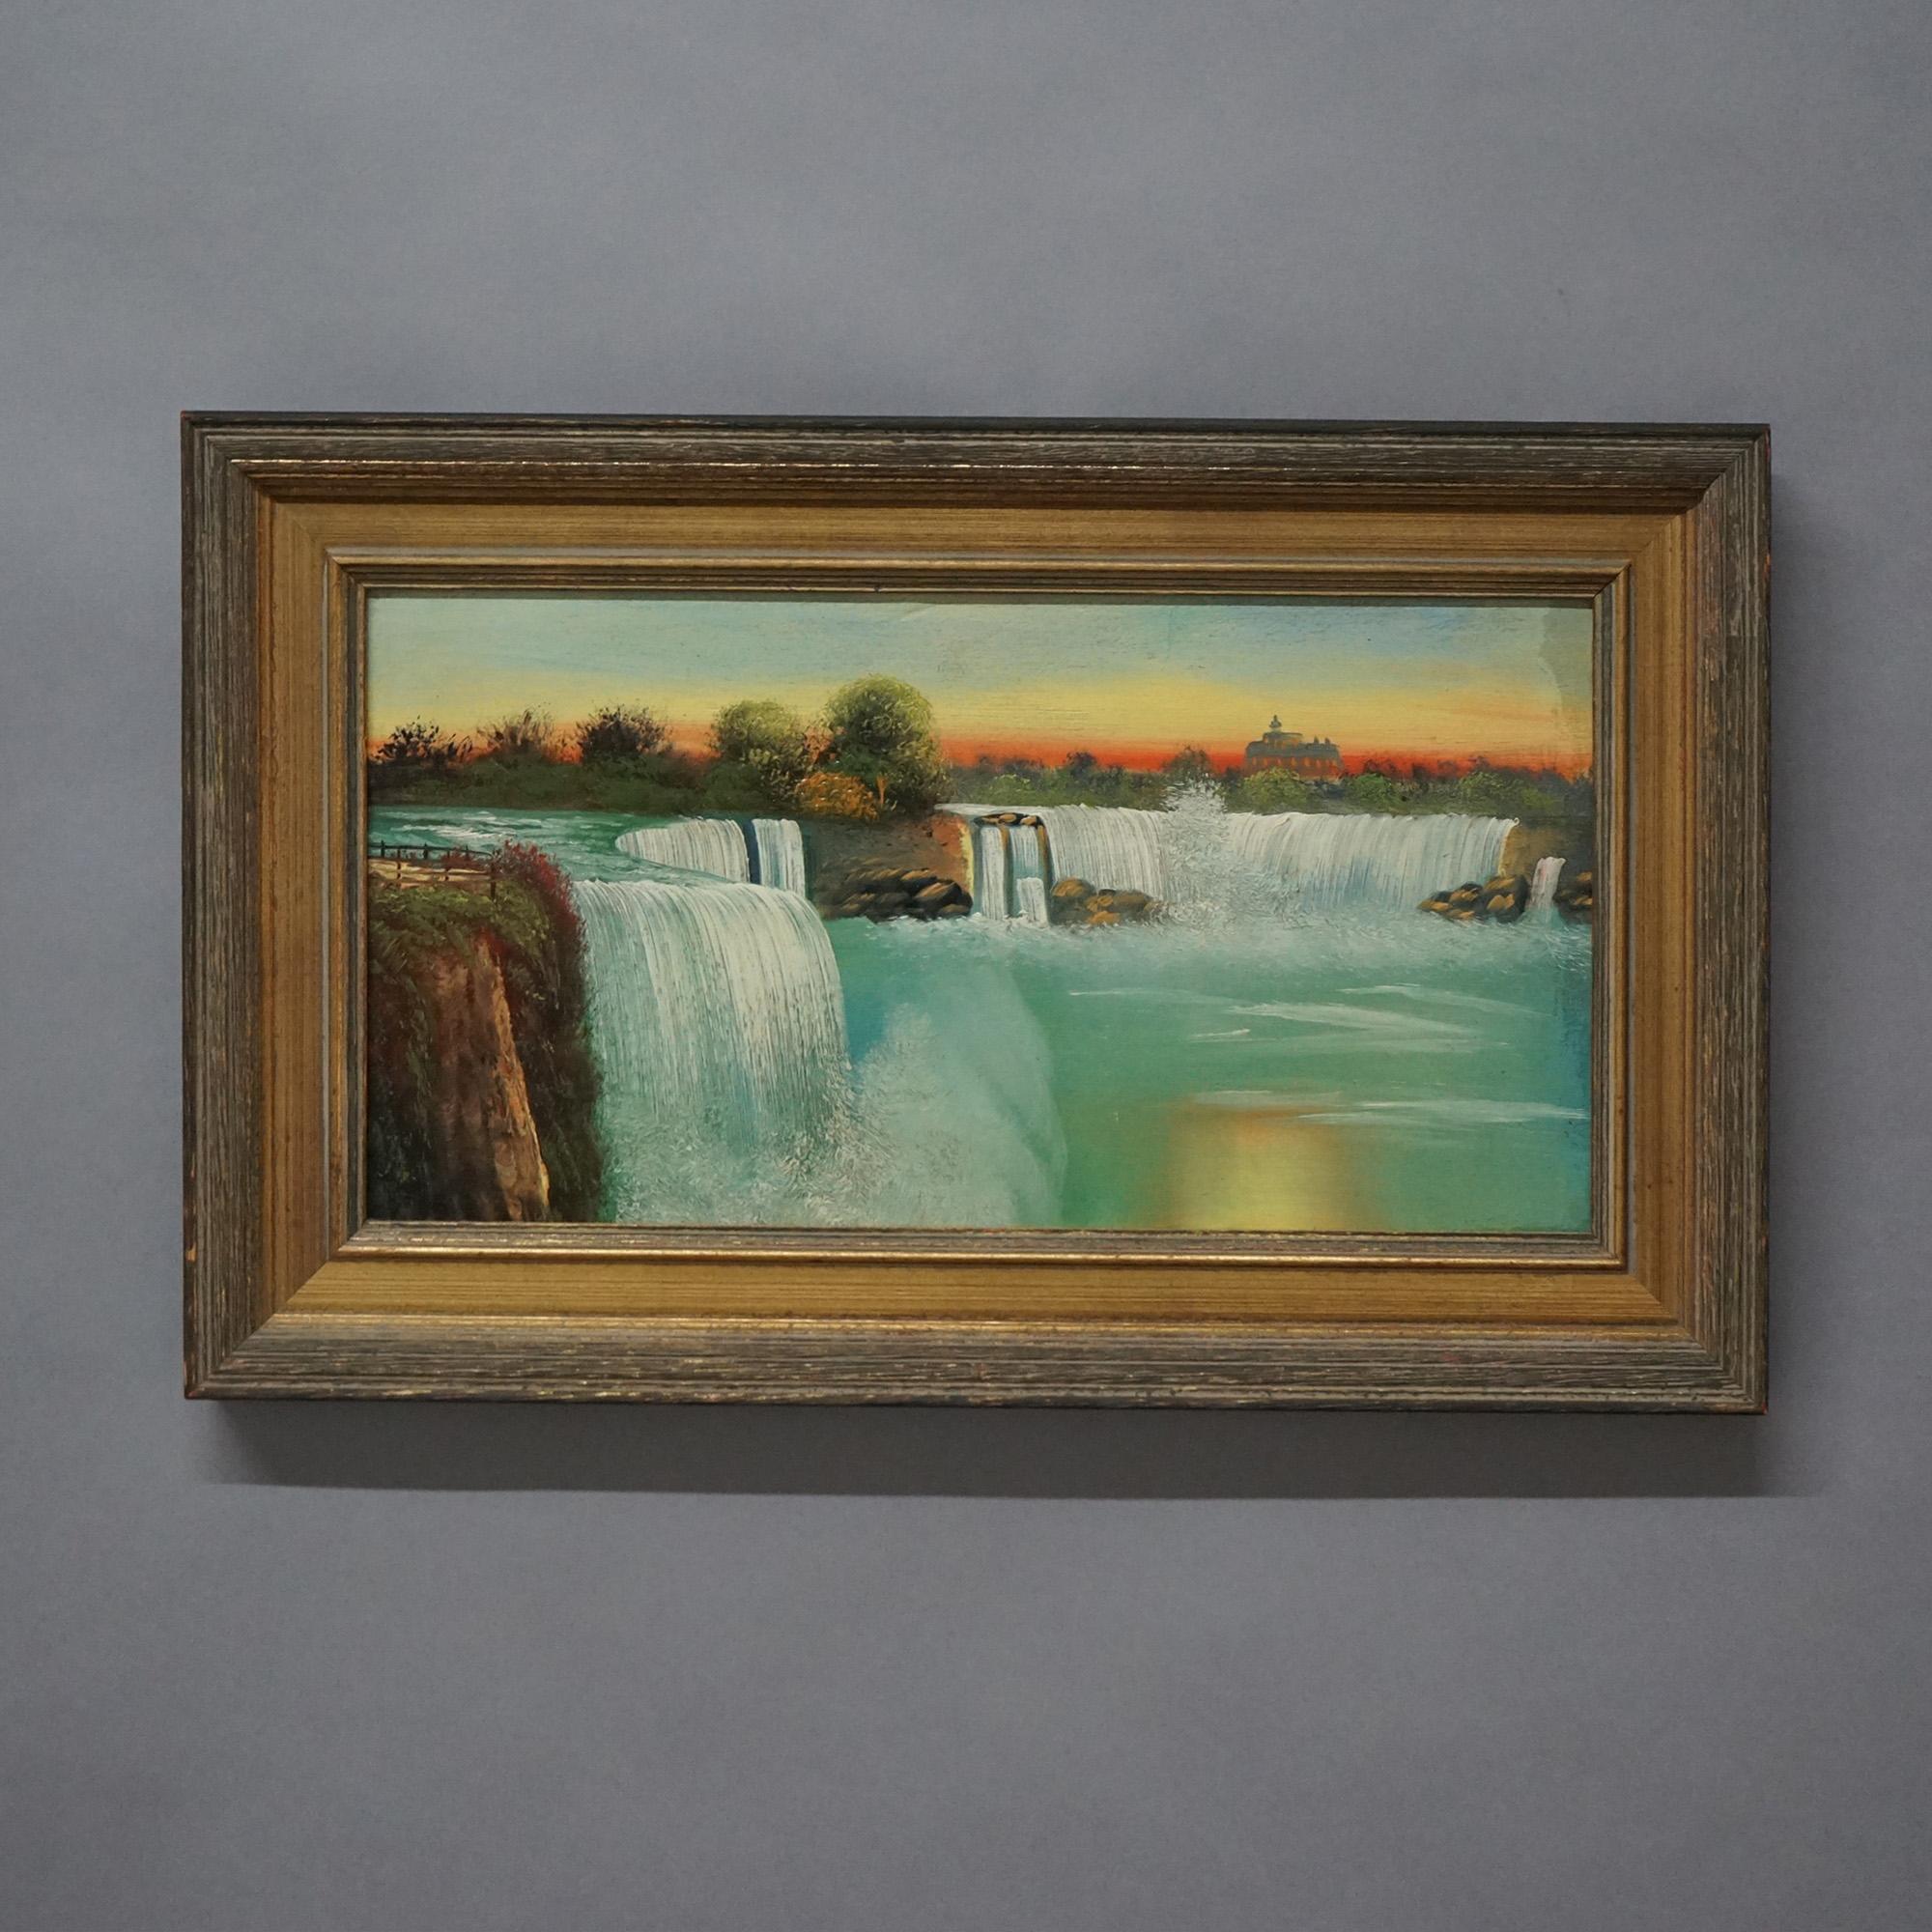 Antique Oil on Panel Painting, View Of Niagara Falls, New York, Circa 1900

Measures- 18.5